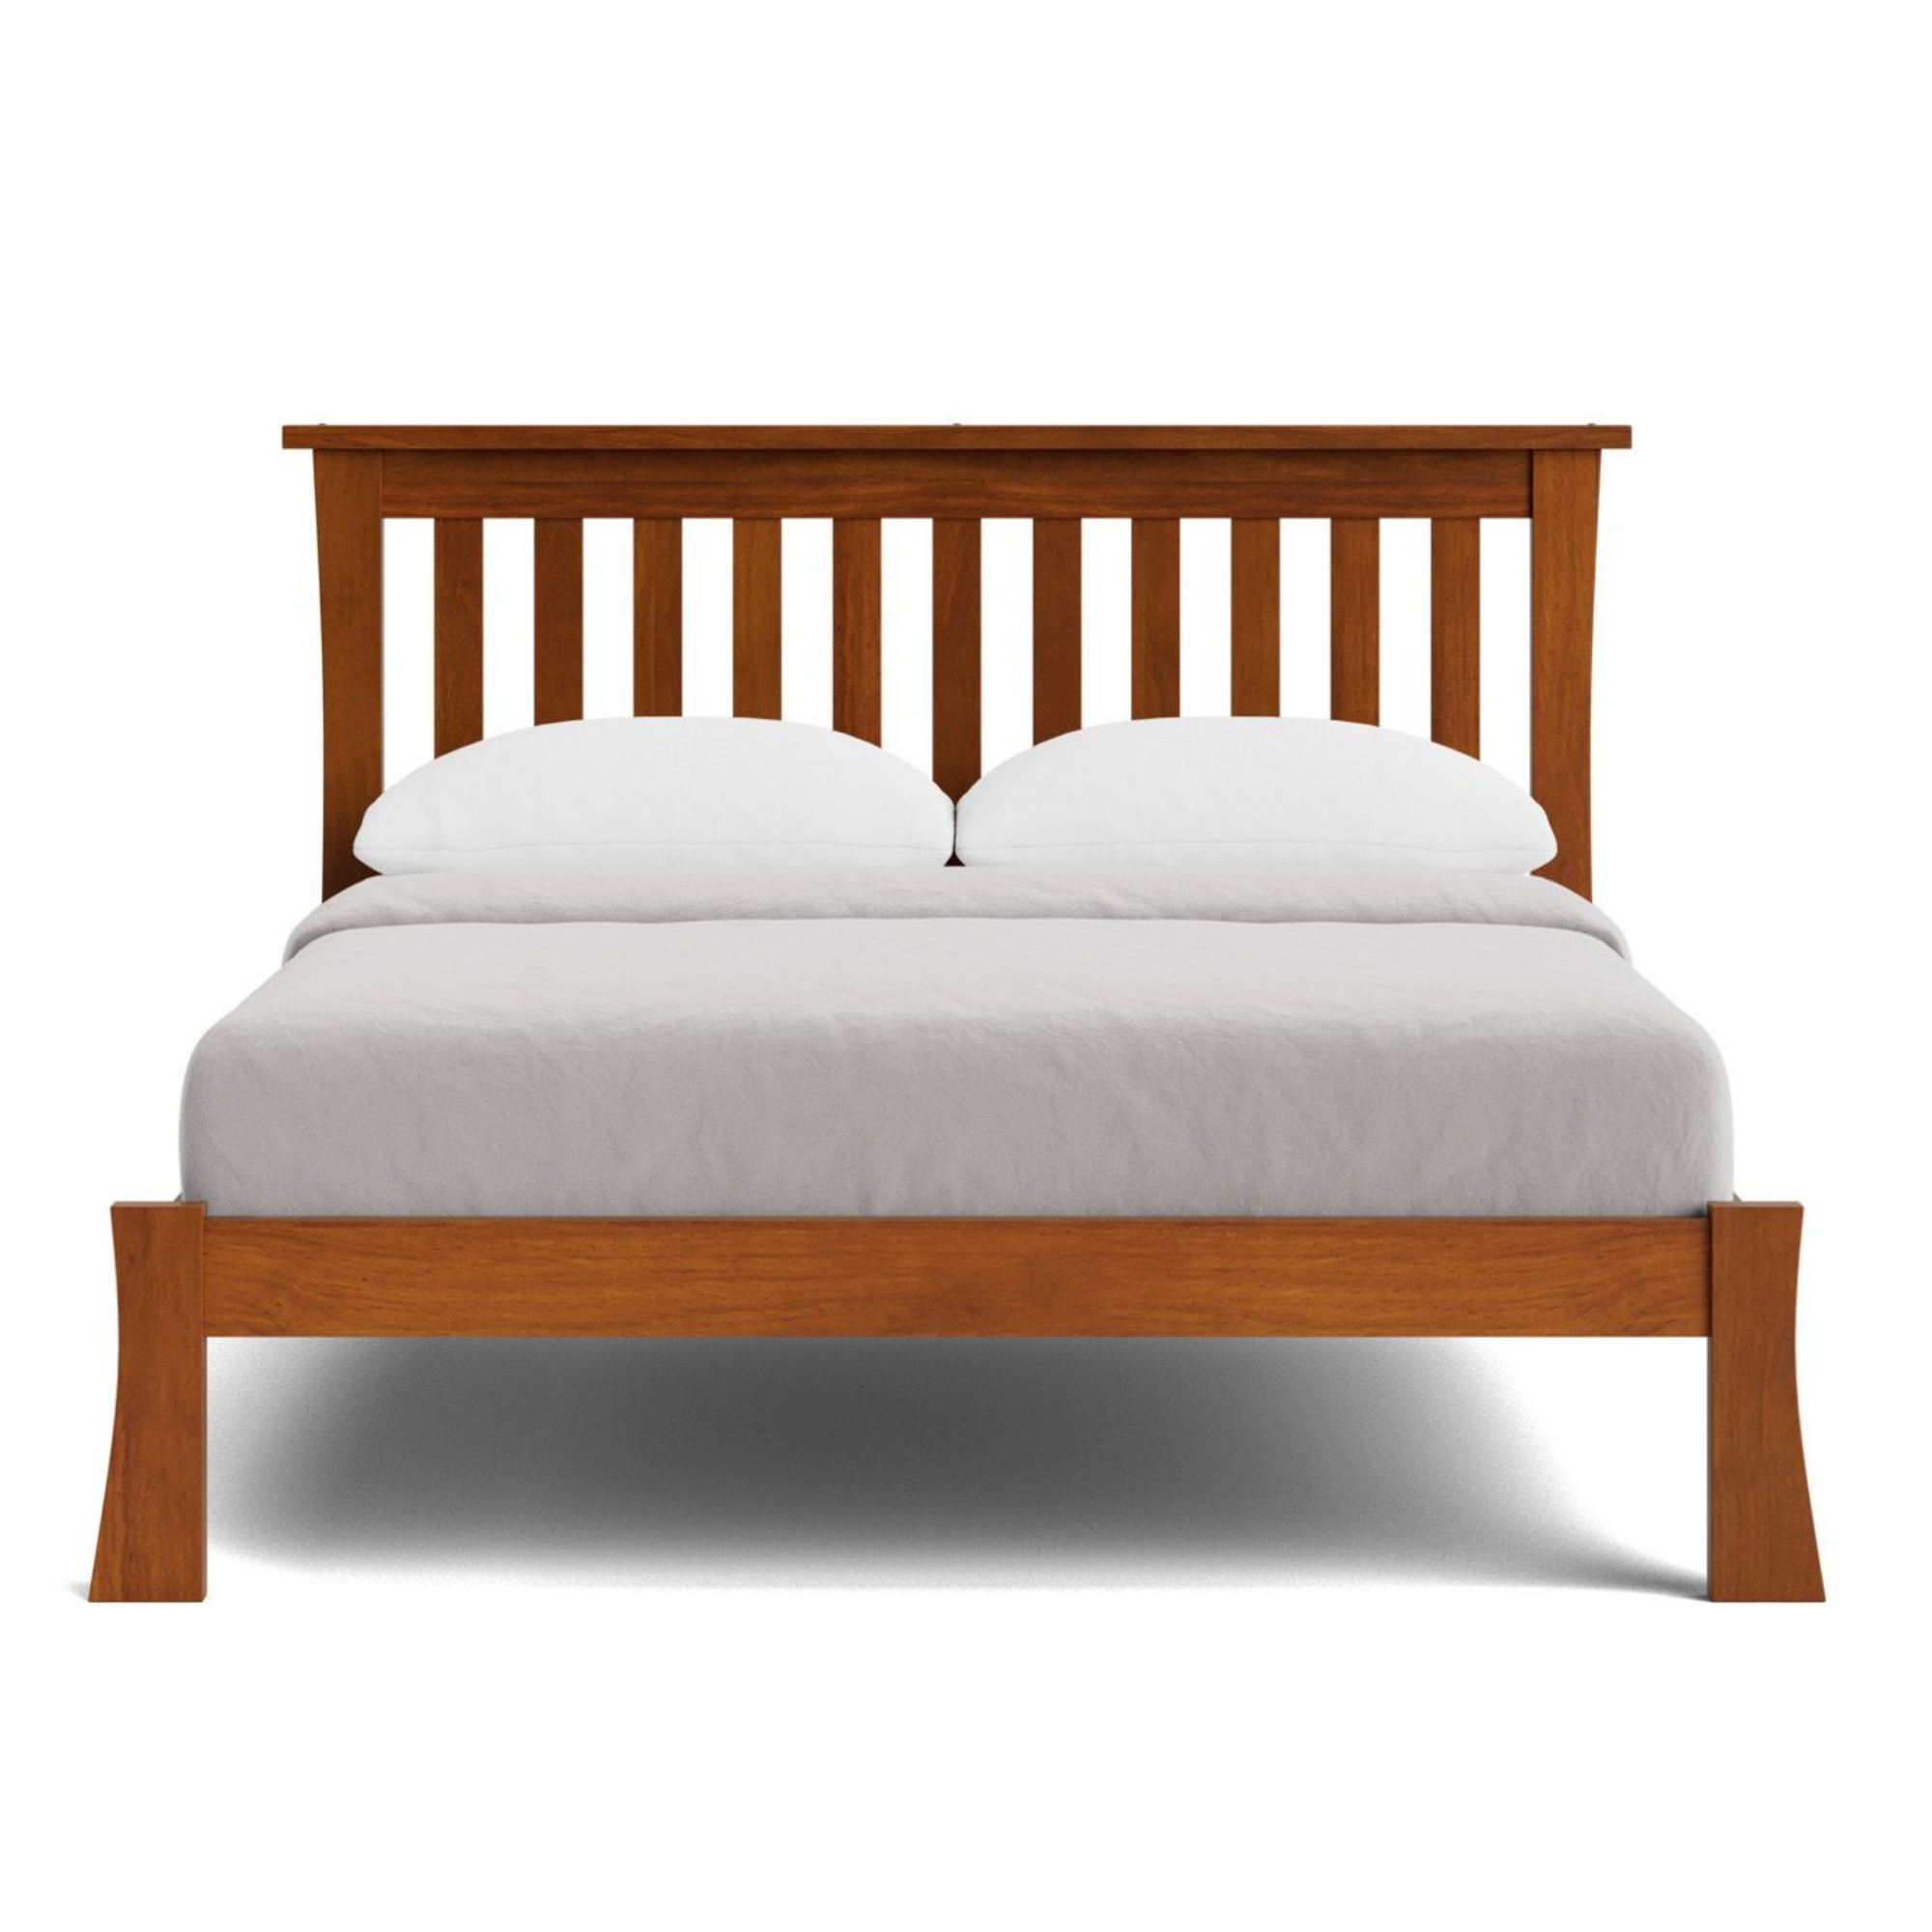 AMBROSE SLAT BED WITH LOW FOOT | ALL SIZES | NZ MADE BEDROOM FURNITURE